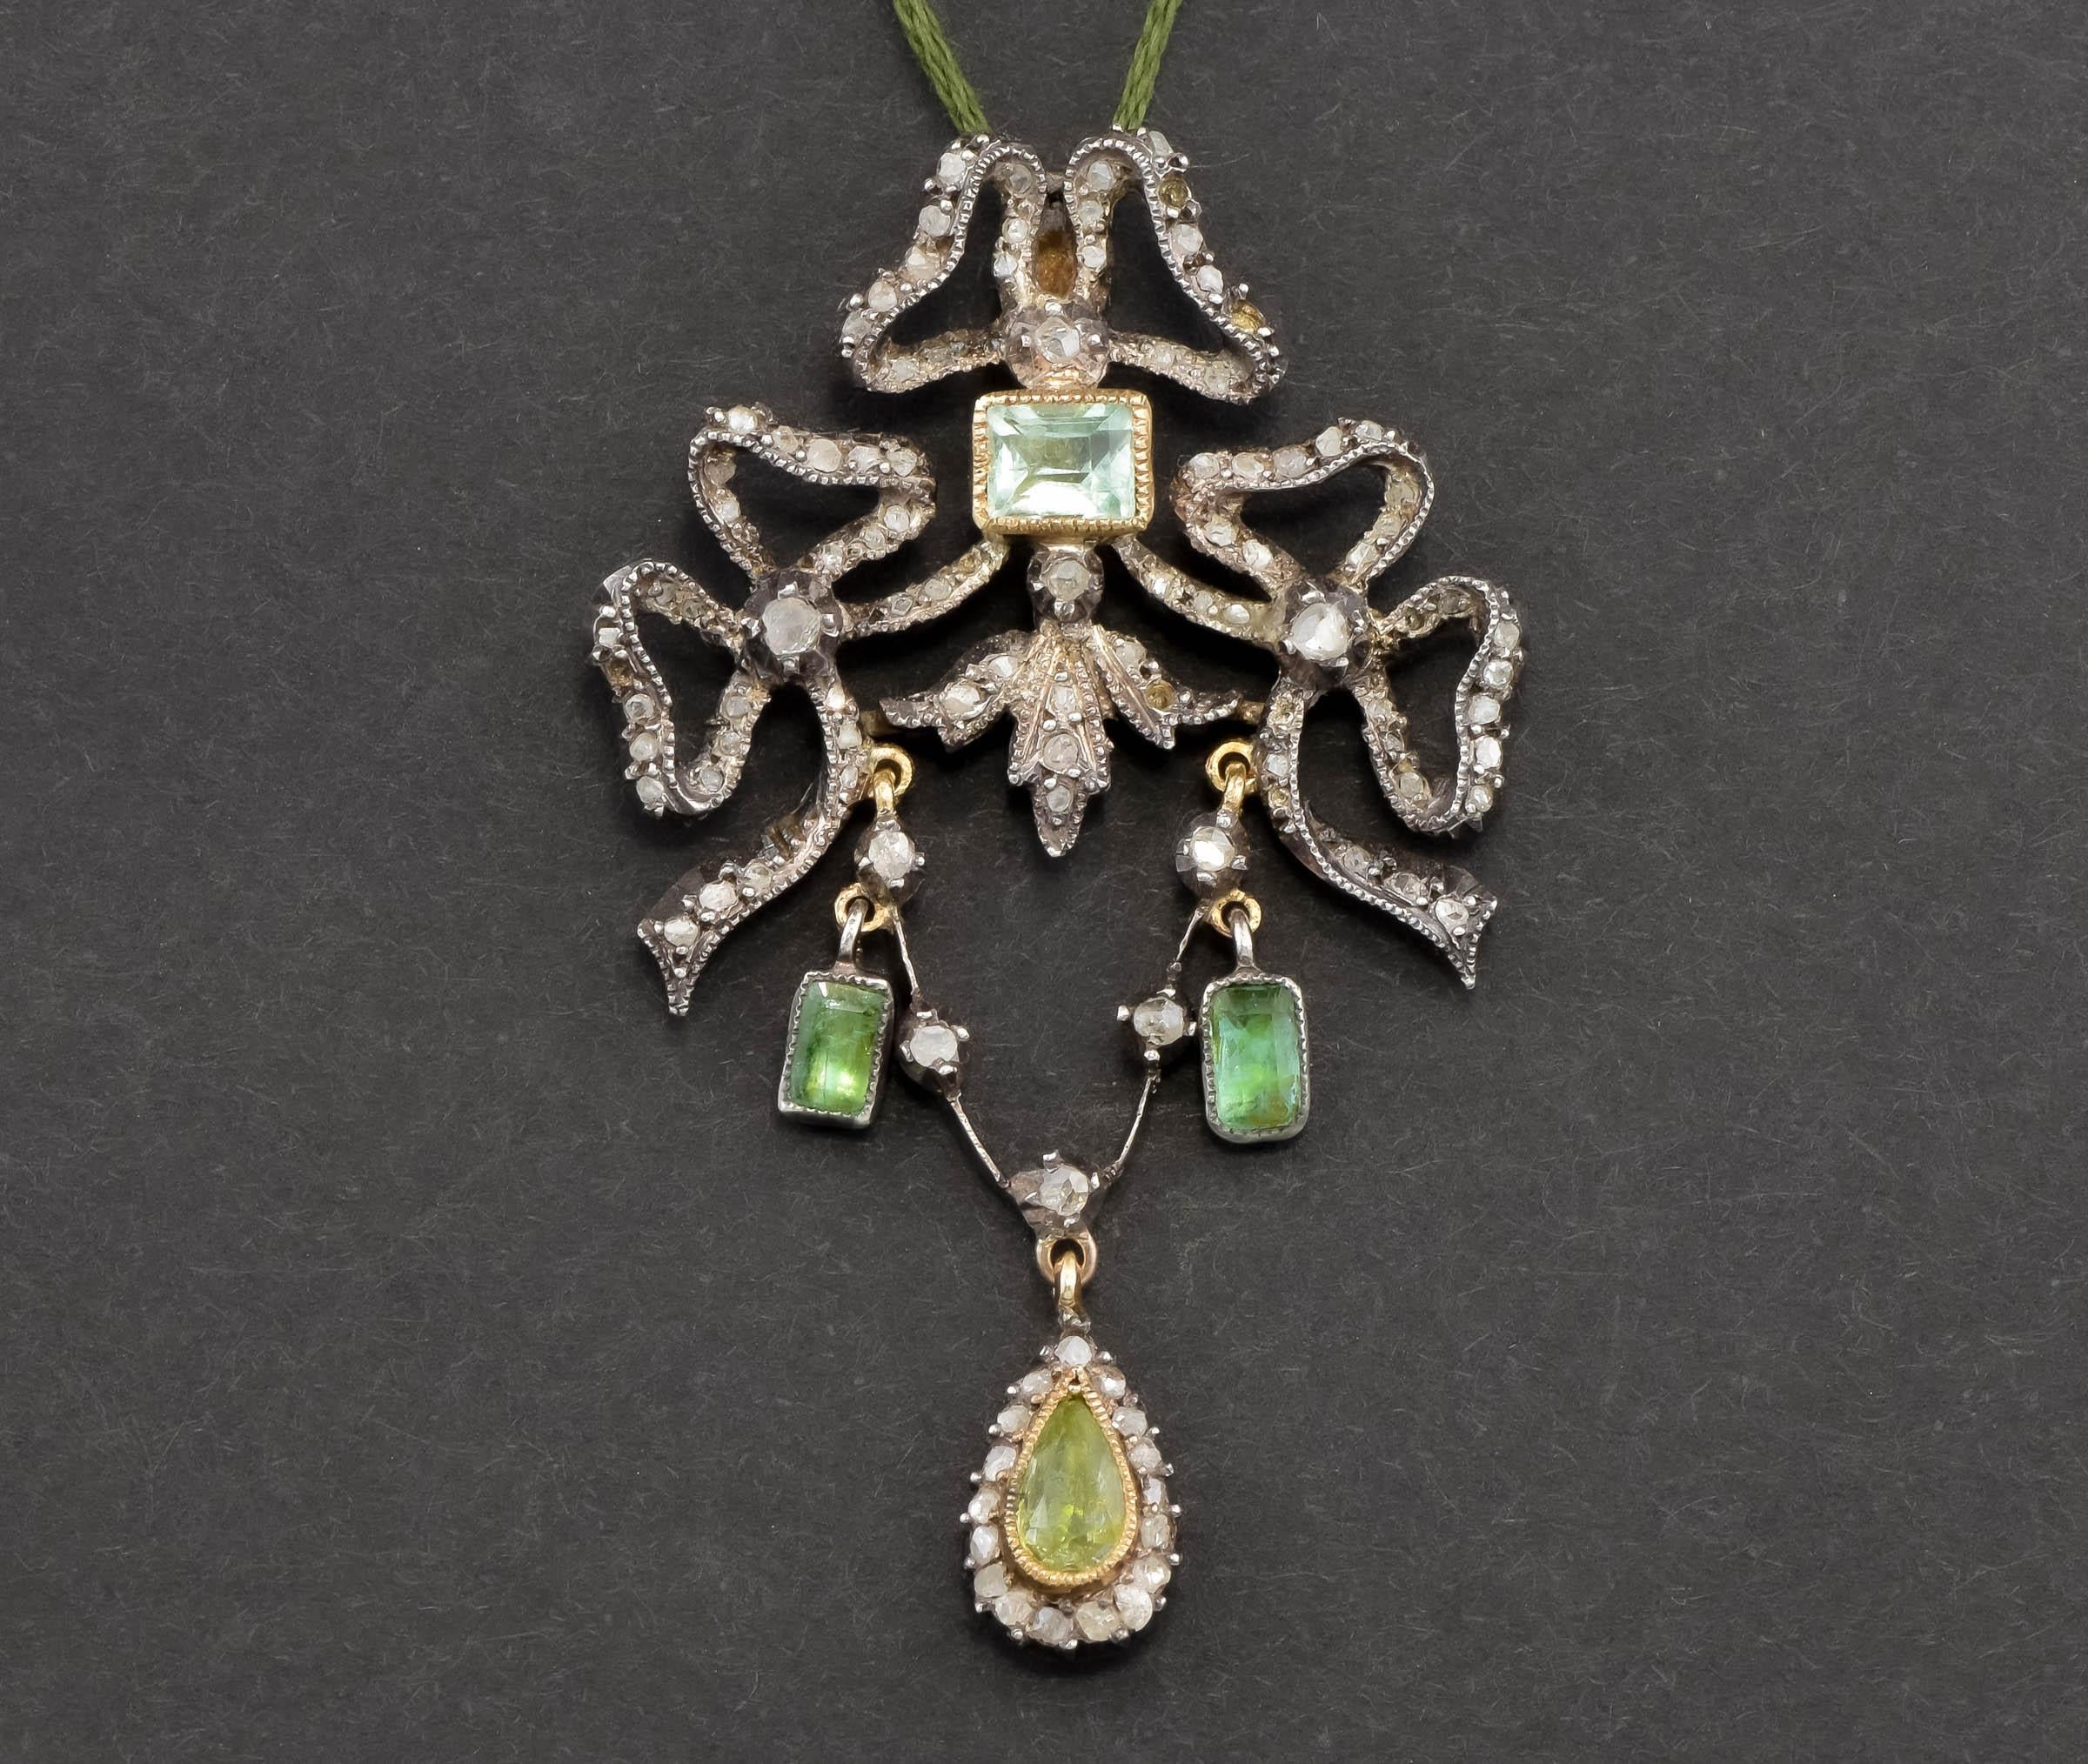 Very elegant - yet eye catching - this wonderful antique pendant has French hallmarks.

Crafted of gold testing between 14K and 18K, along with silver, the pendant features rustic rose cut diamonds and old glowing foil backed beryl/emeralds. Three